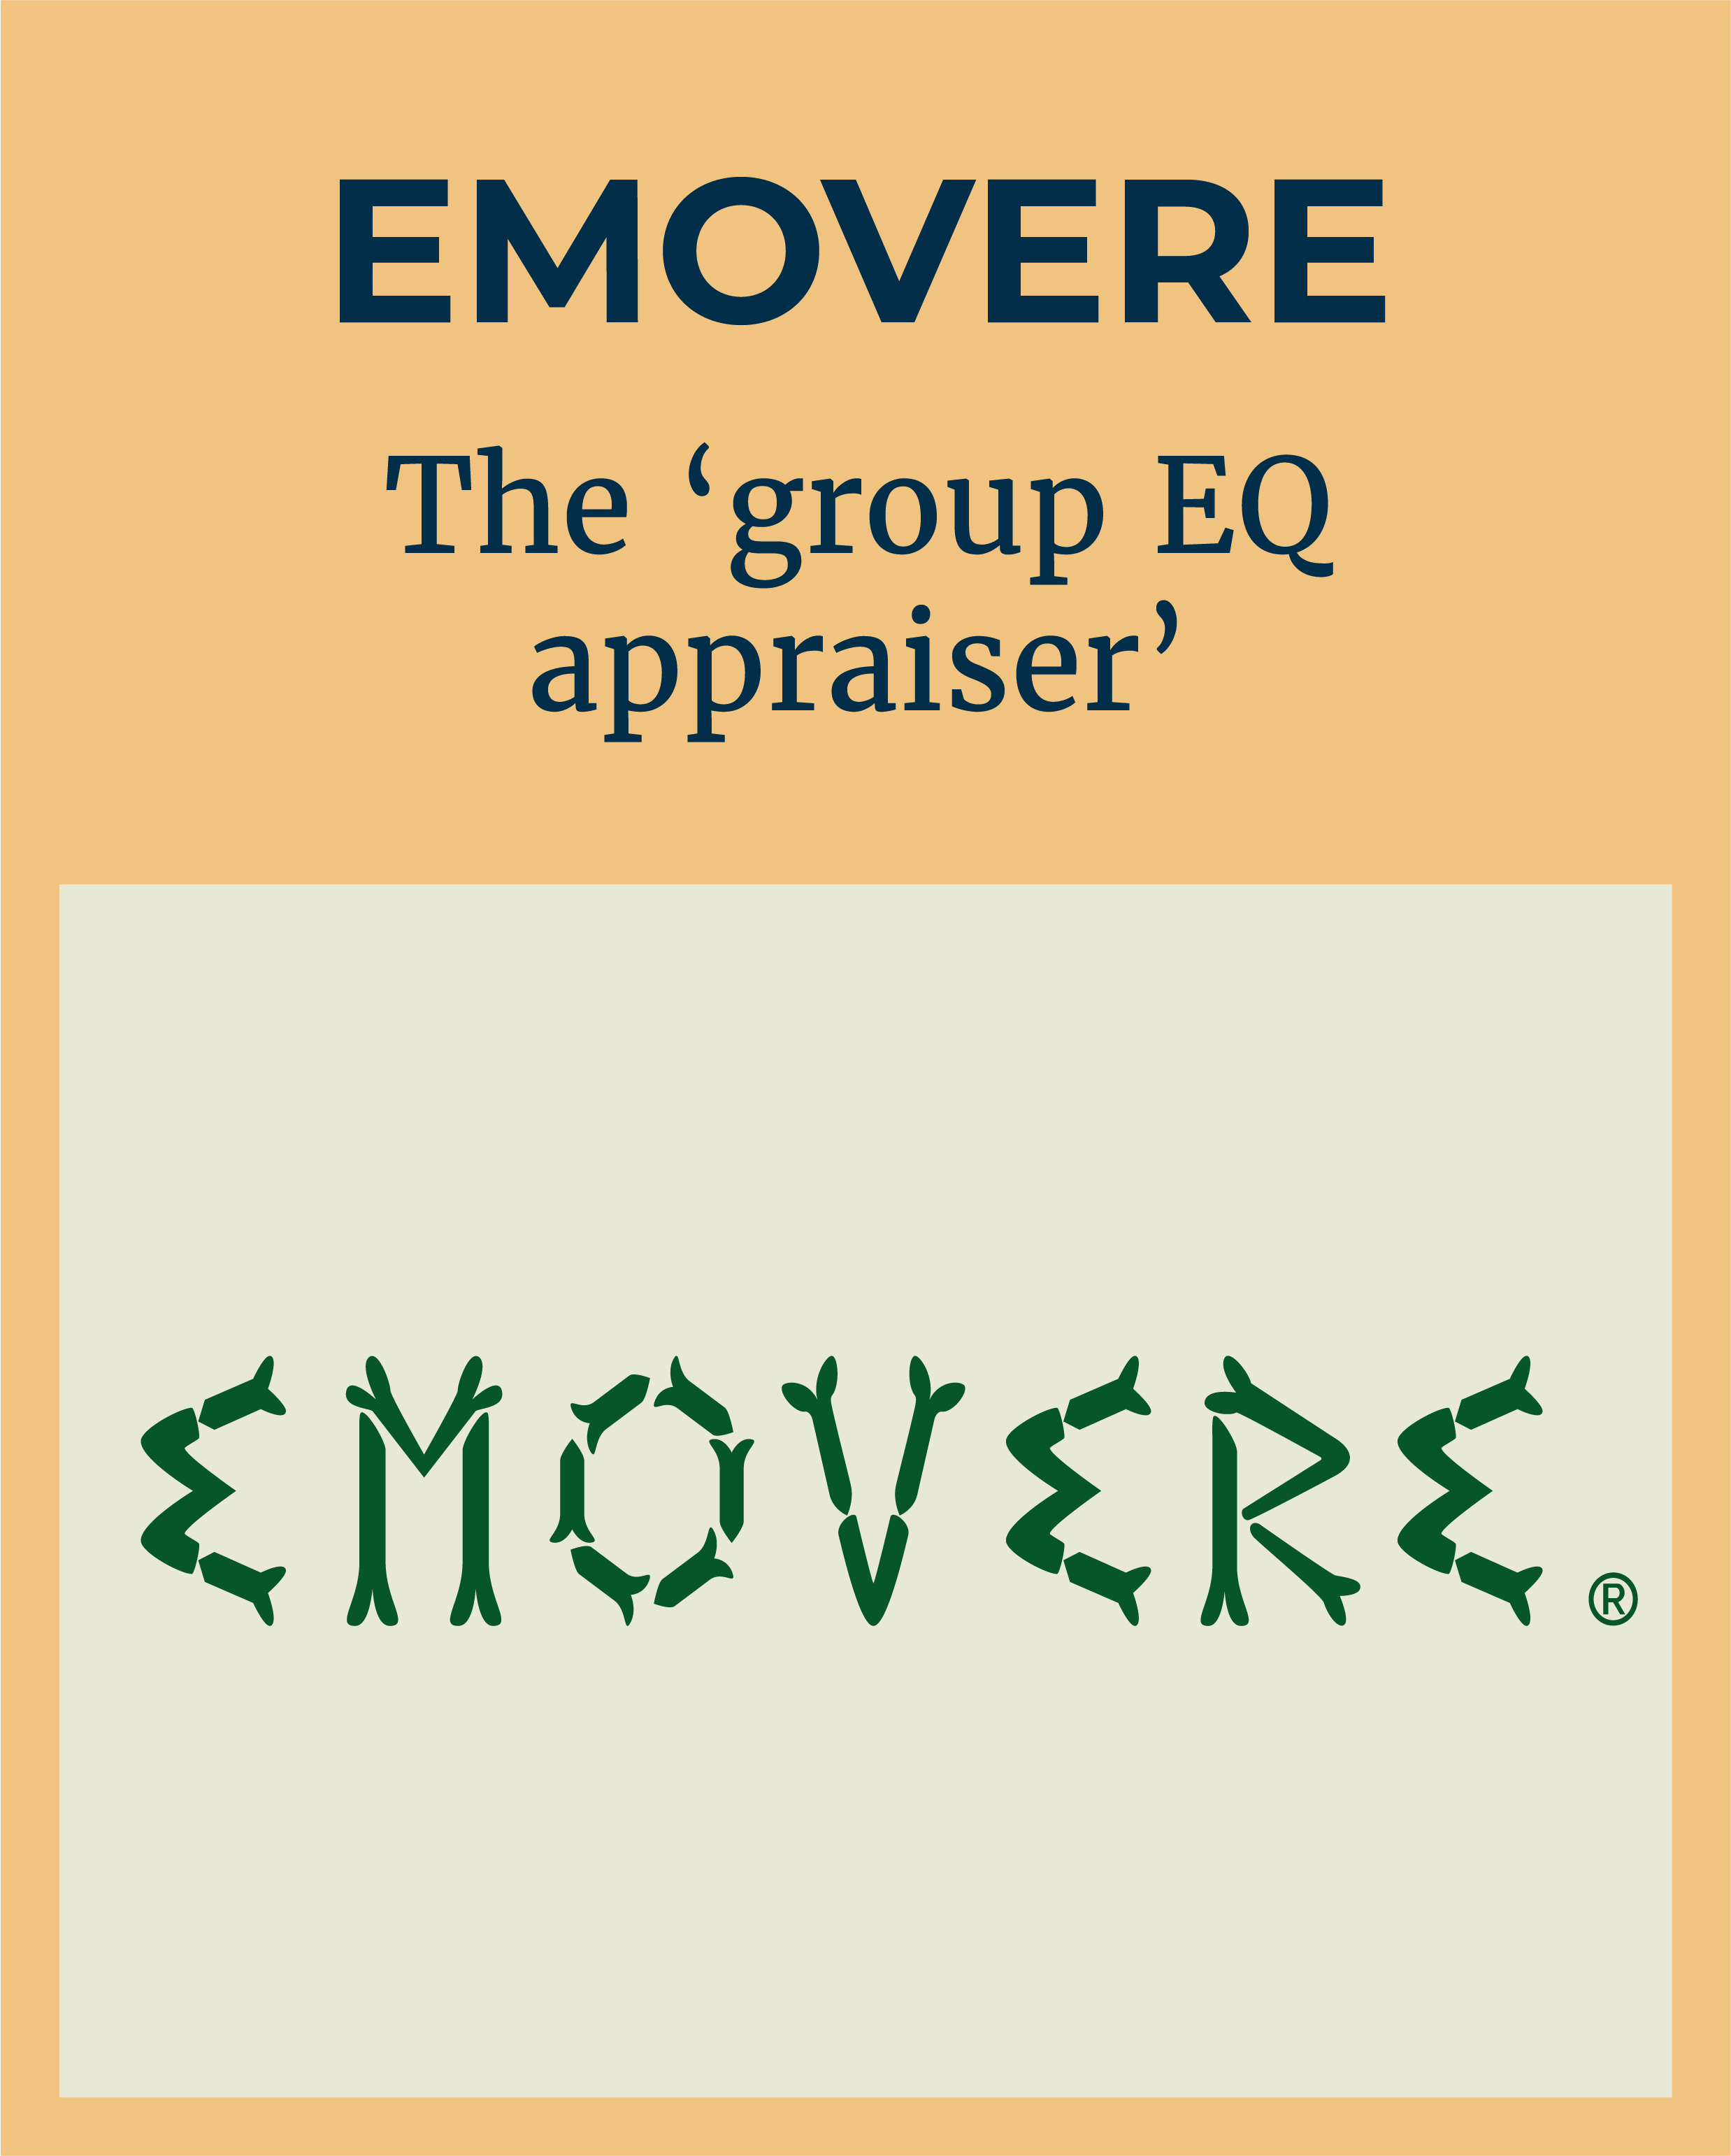 Logo of EMOVERE - the research product that is the 'group EQ appraiser'